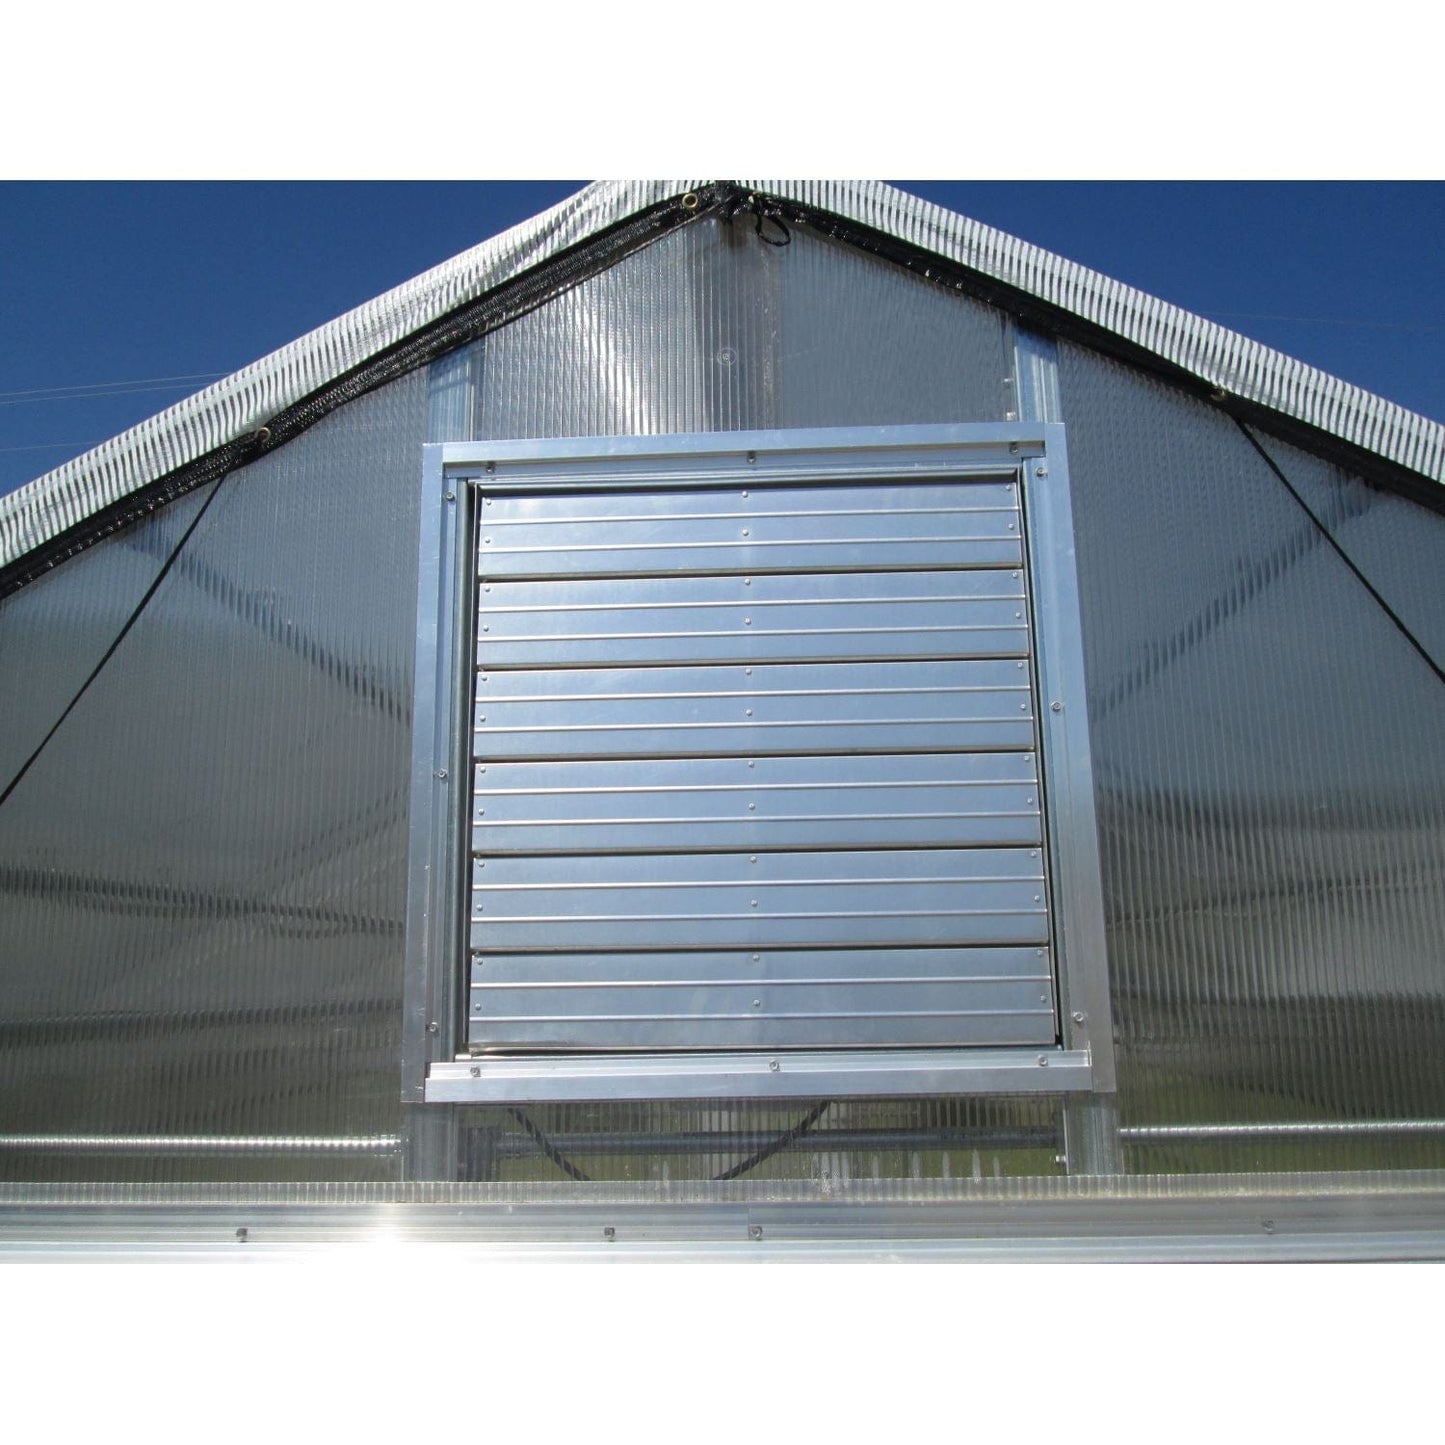 Riverstone Industries Educational Greenhouse Kit Riverstone | Wallace 16FT x 30FT Educational Greenhouse Kit With 8FT High Walls R16308-P